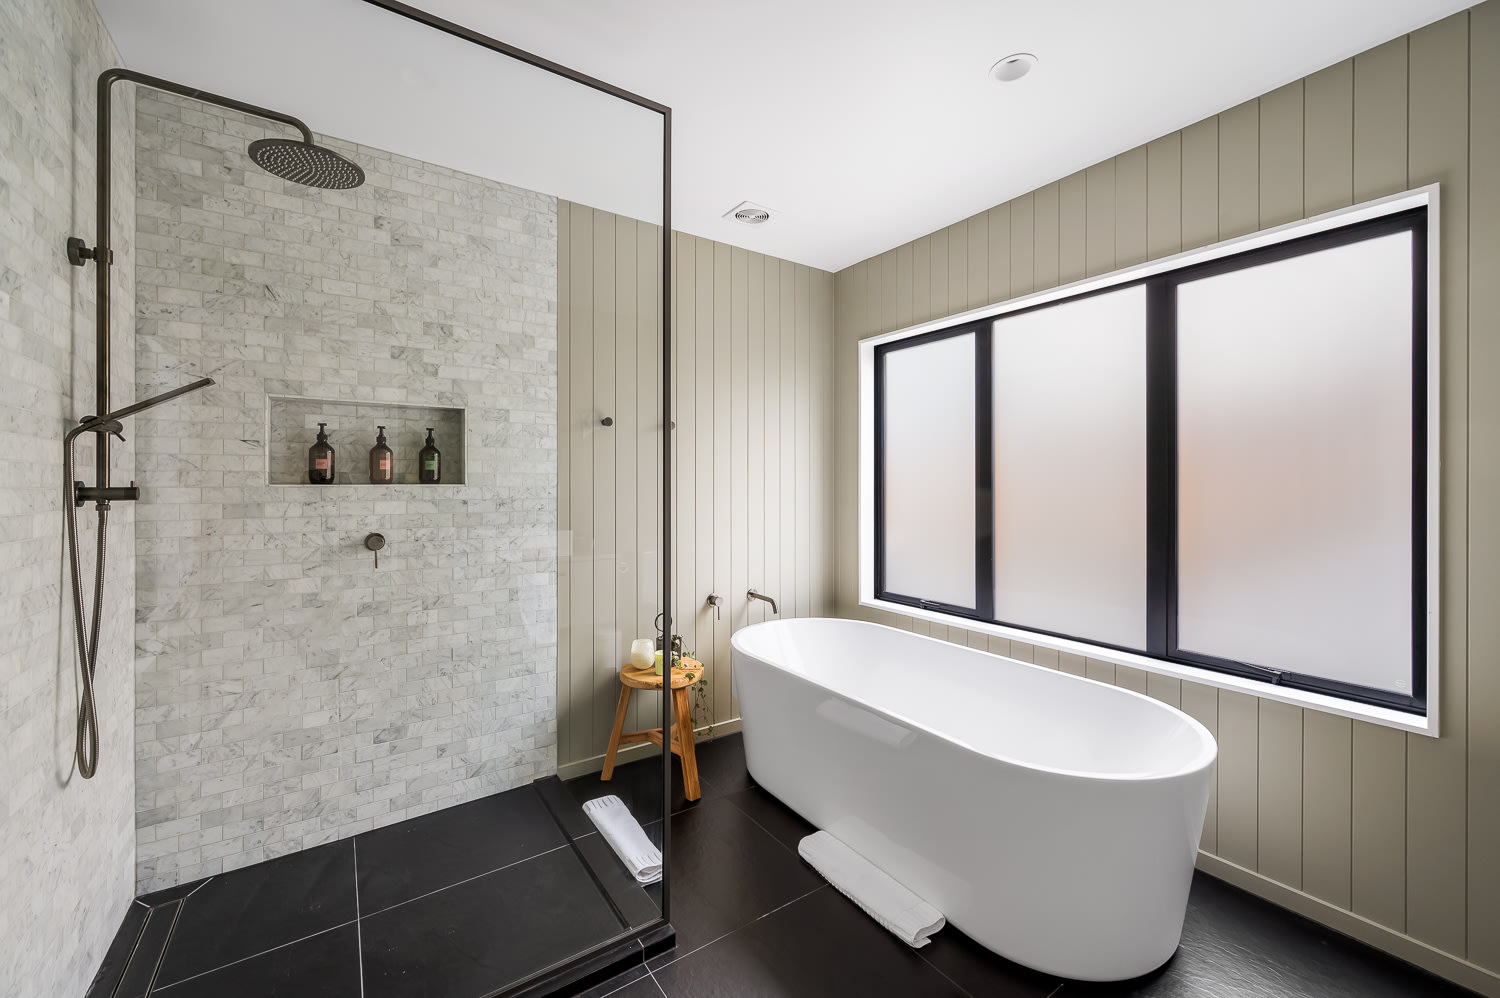 Imagine a bath with luxurious amenities provided